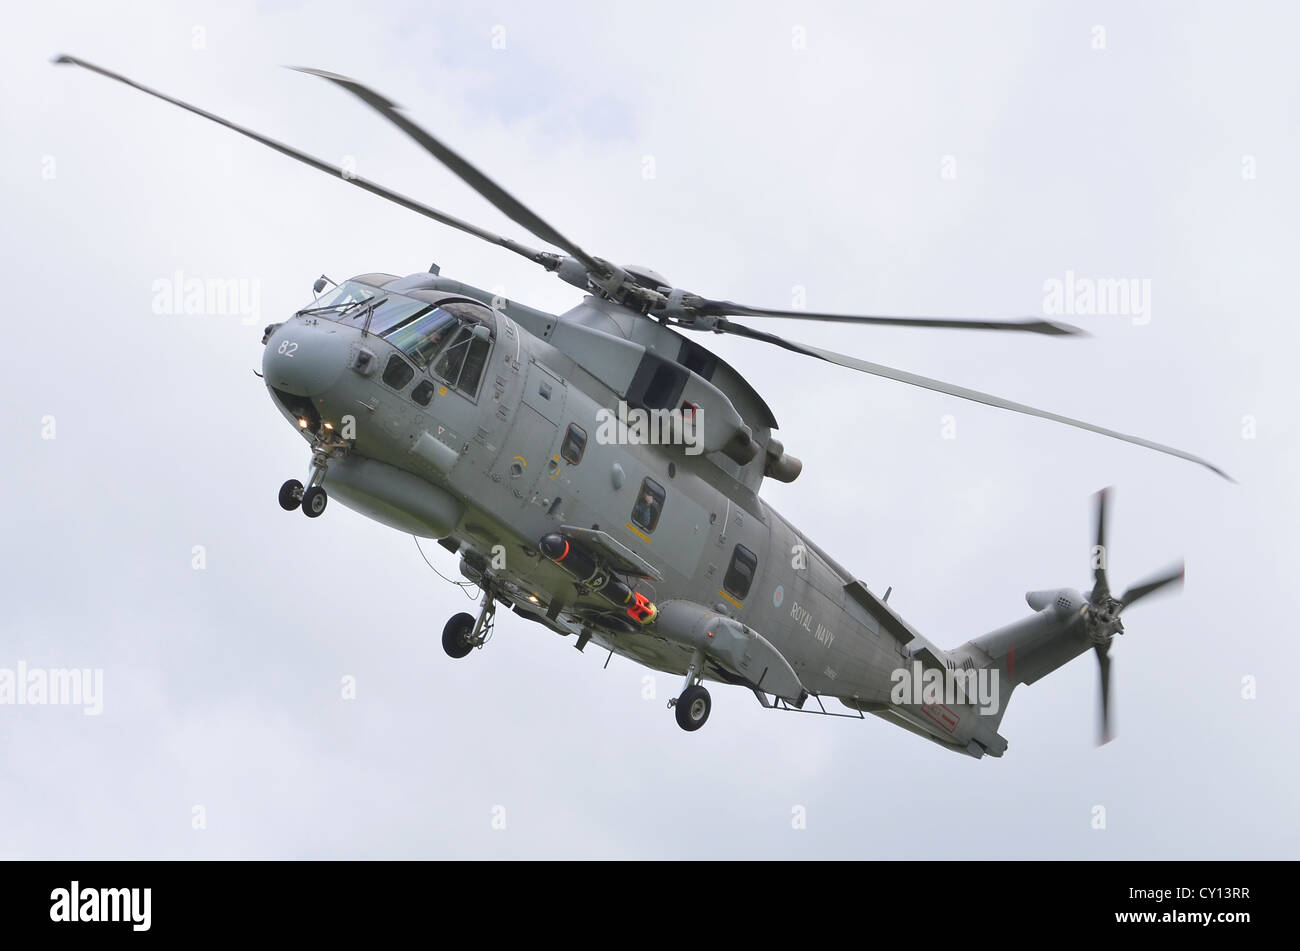 EHI EH-101 Merlin HM1 helicopter operated by the Royal Navy on approach for landing at RAF Fairford Stock Photo